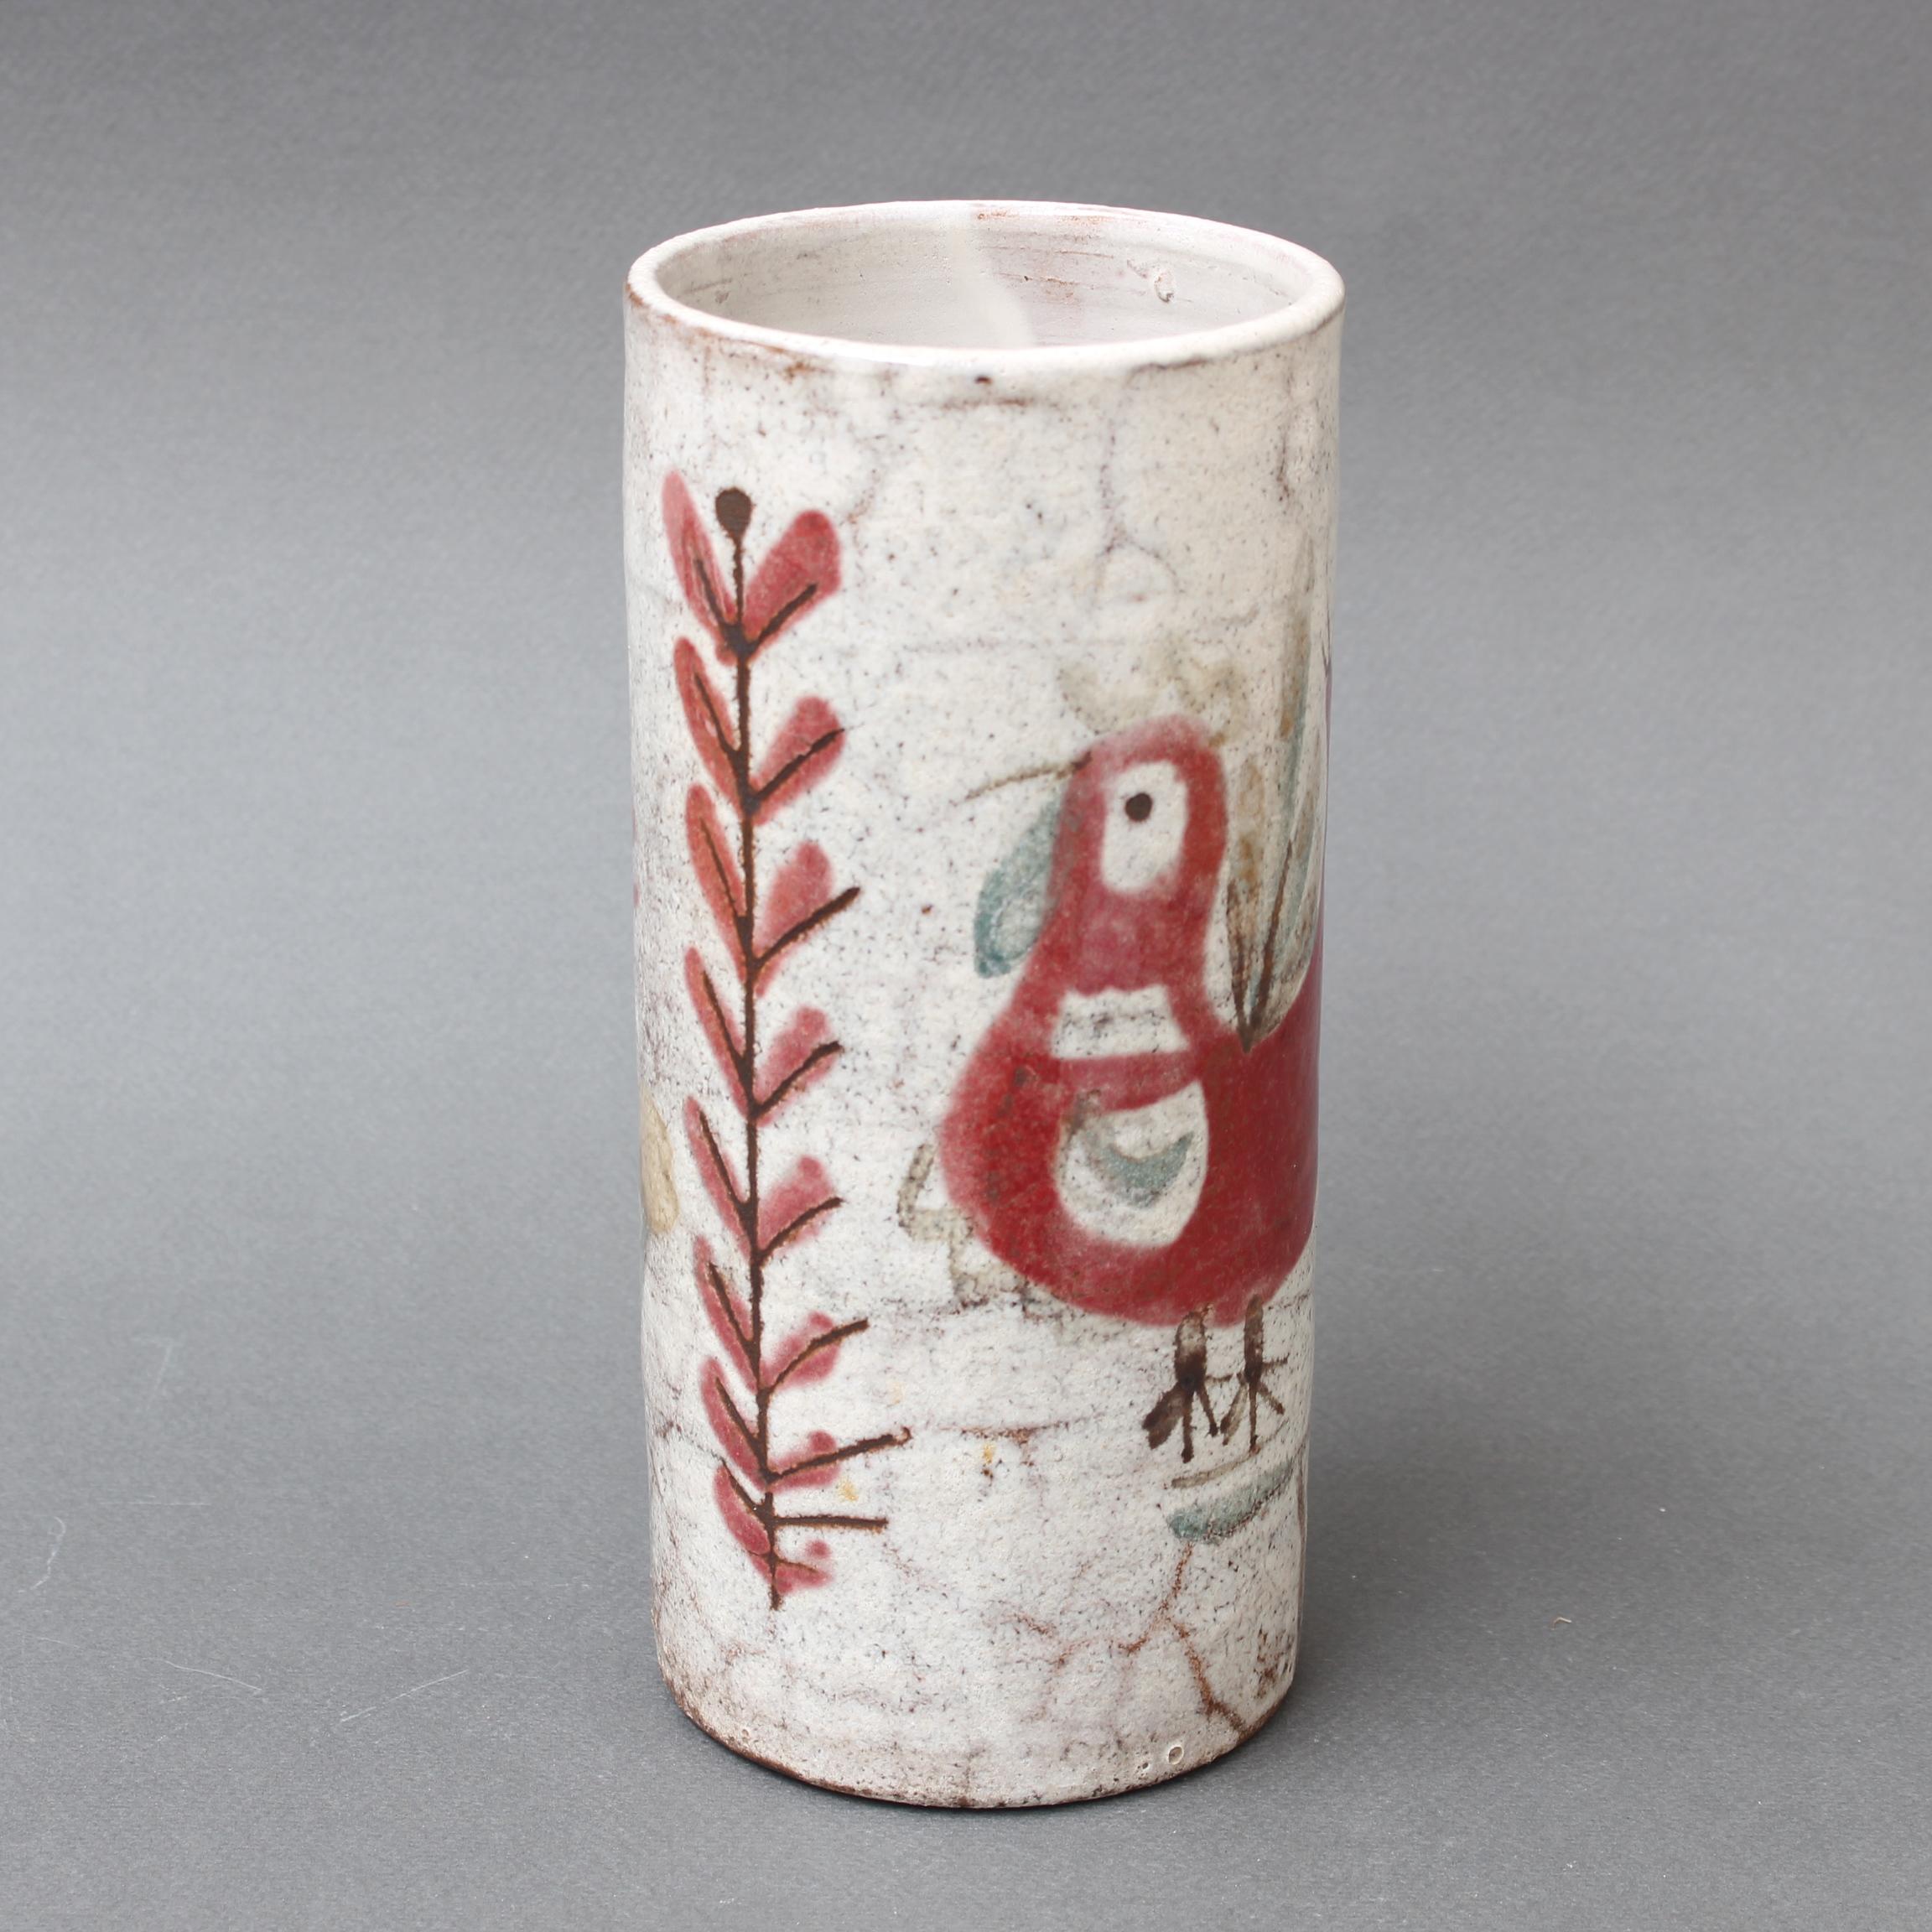 Vintage French ceramic flower vase by Le Mûrier (circa 1960s). A charming cylindrical vase in the distinctive Le Mûrier Provençal style with their trademark, stylised mulberry flower and upright leaf motif. The underlying glaze is a delicate